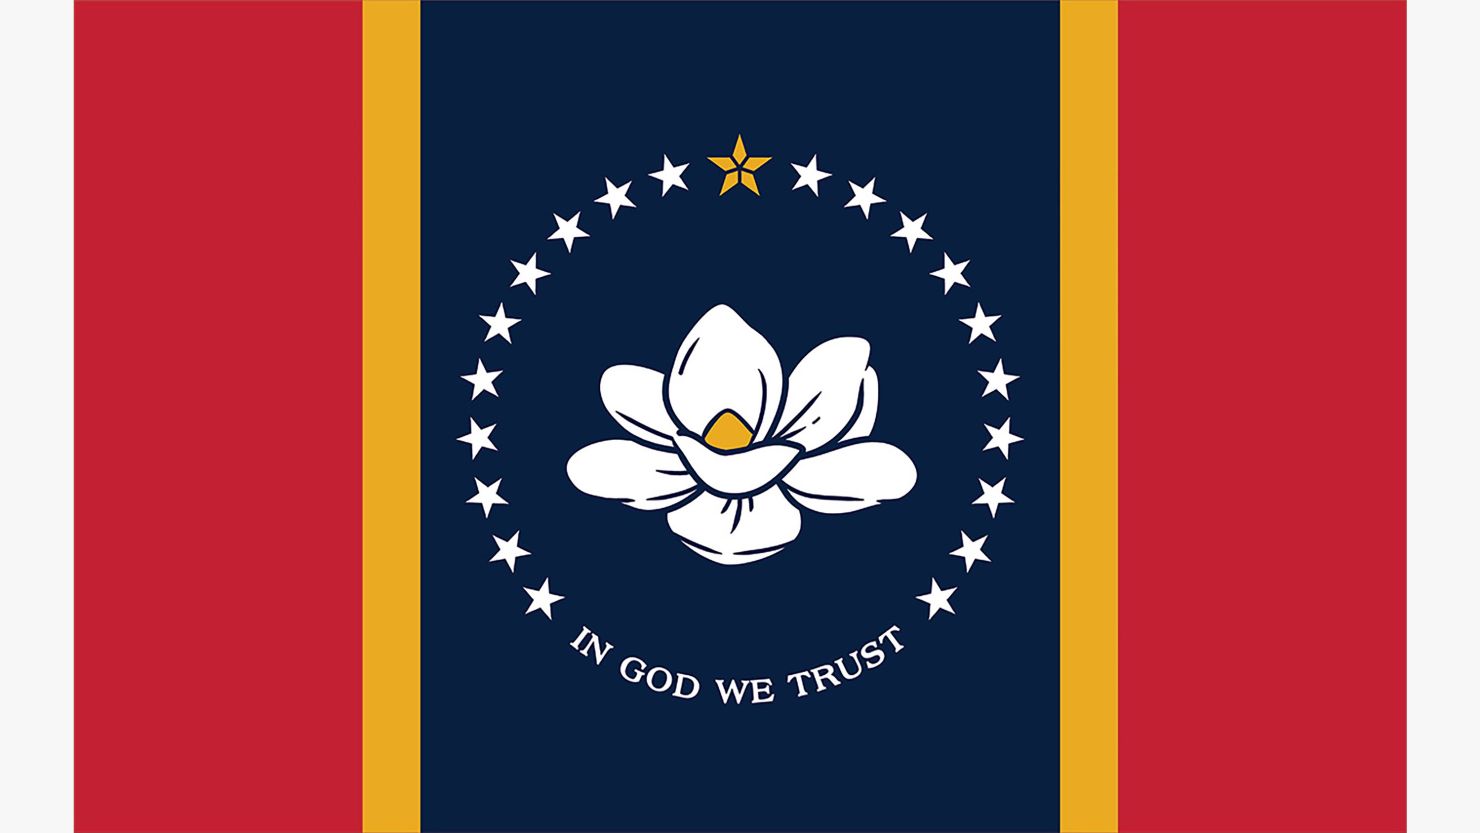 The new flag features a magnolia blossom surrounded by 20 stars, signifying Mississippi's status at the 20th state in the union, and a gold five-point star to reflect Mississippi's indigenous Native American tribes.